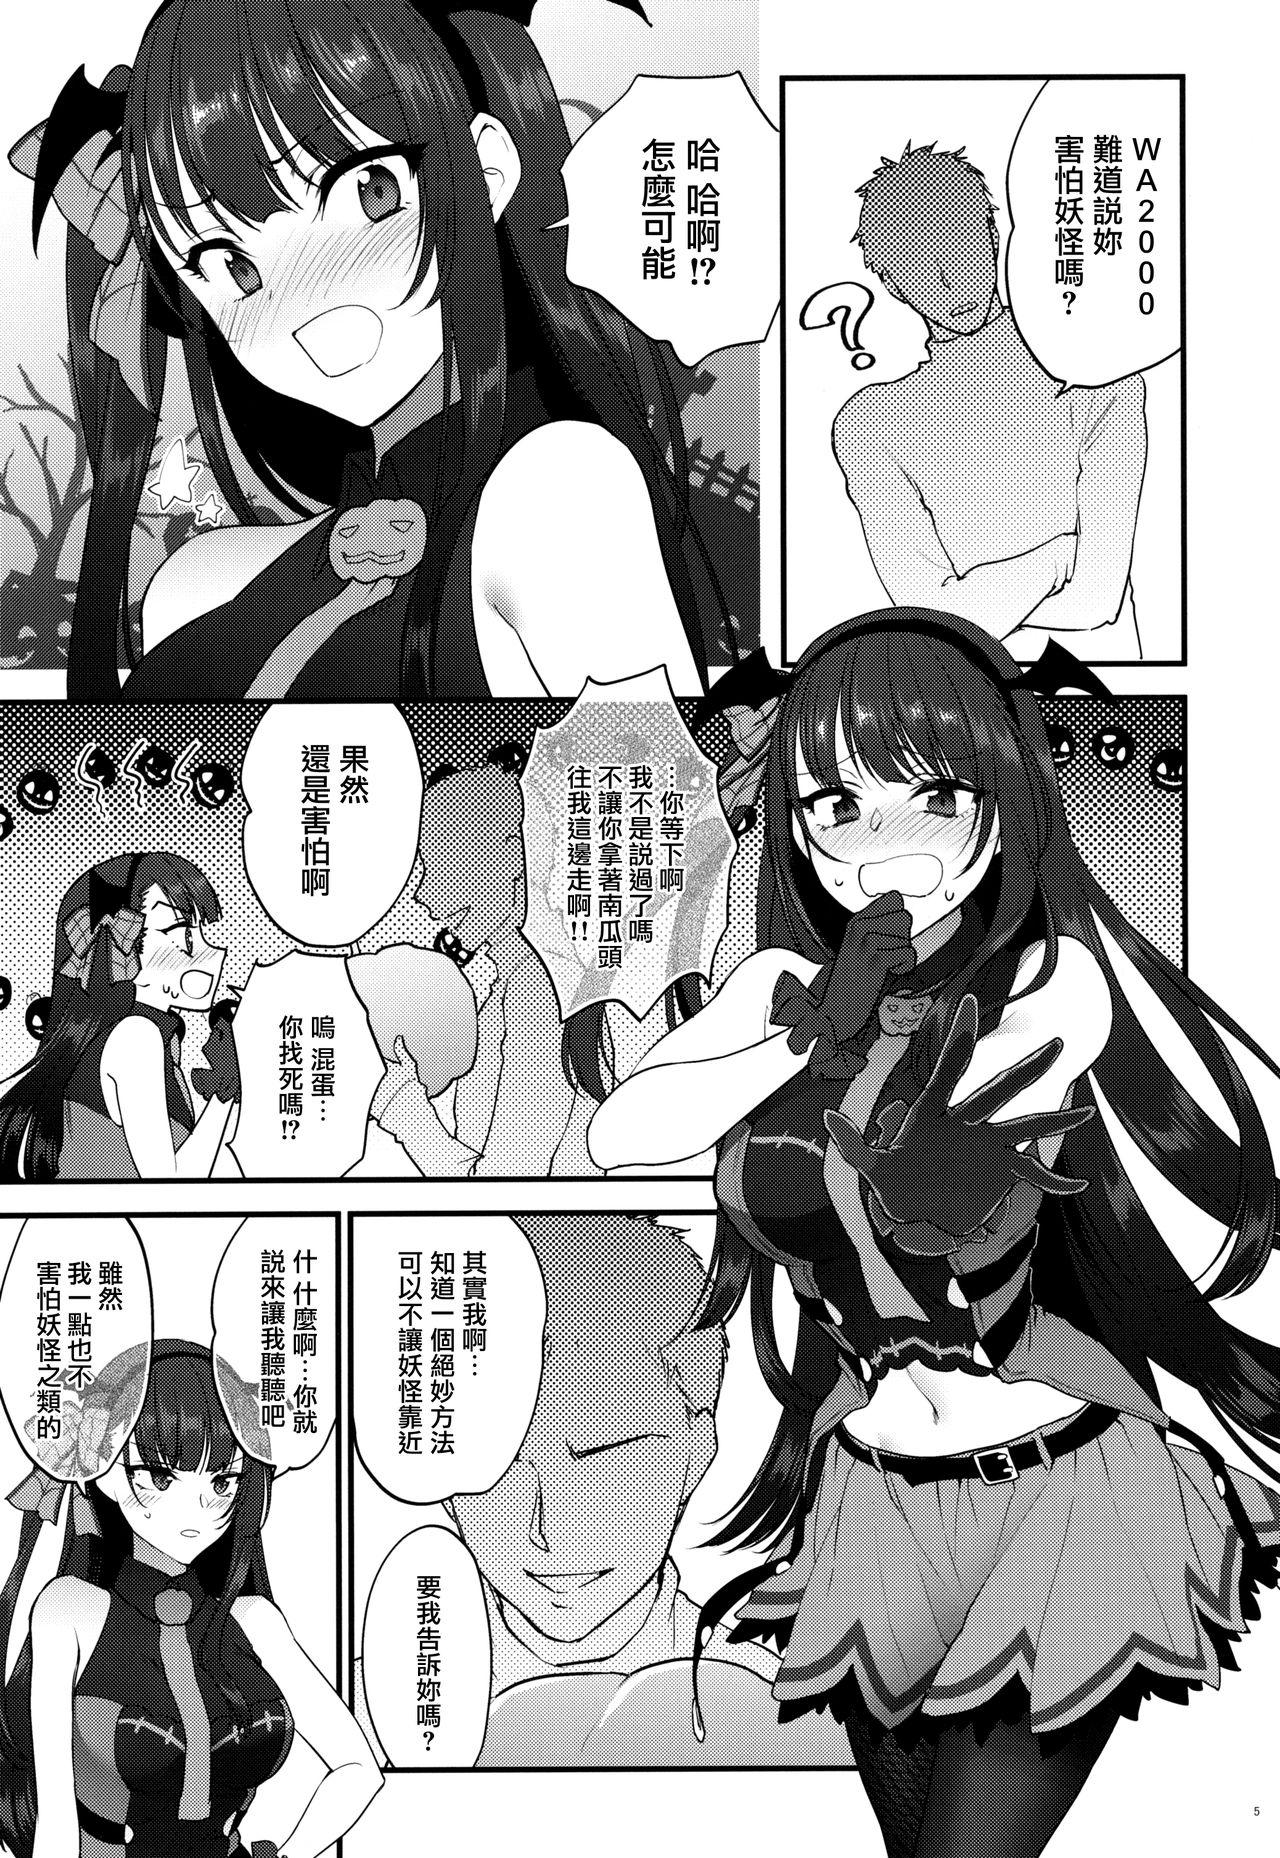 Bald Pussy Obake nante Inai! - Girls frontline Hot Girl Pussy - Page 4